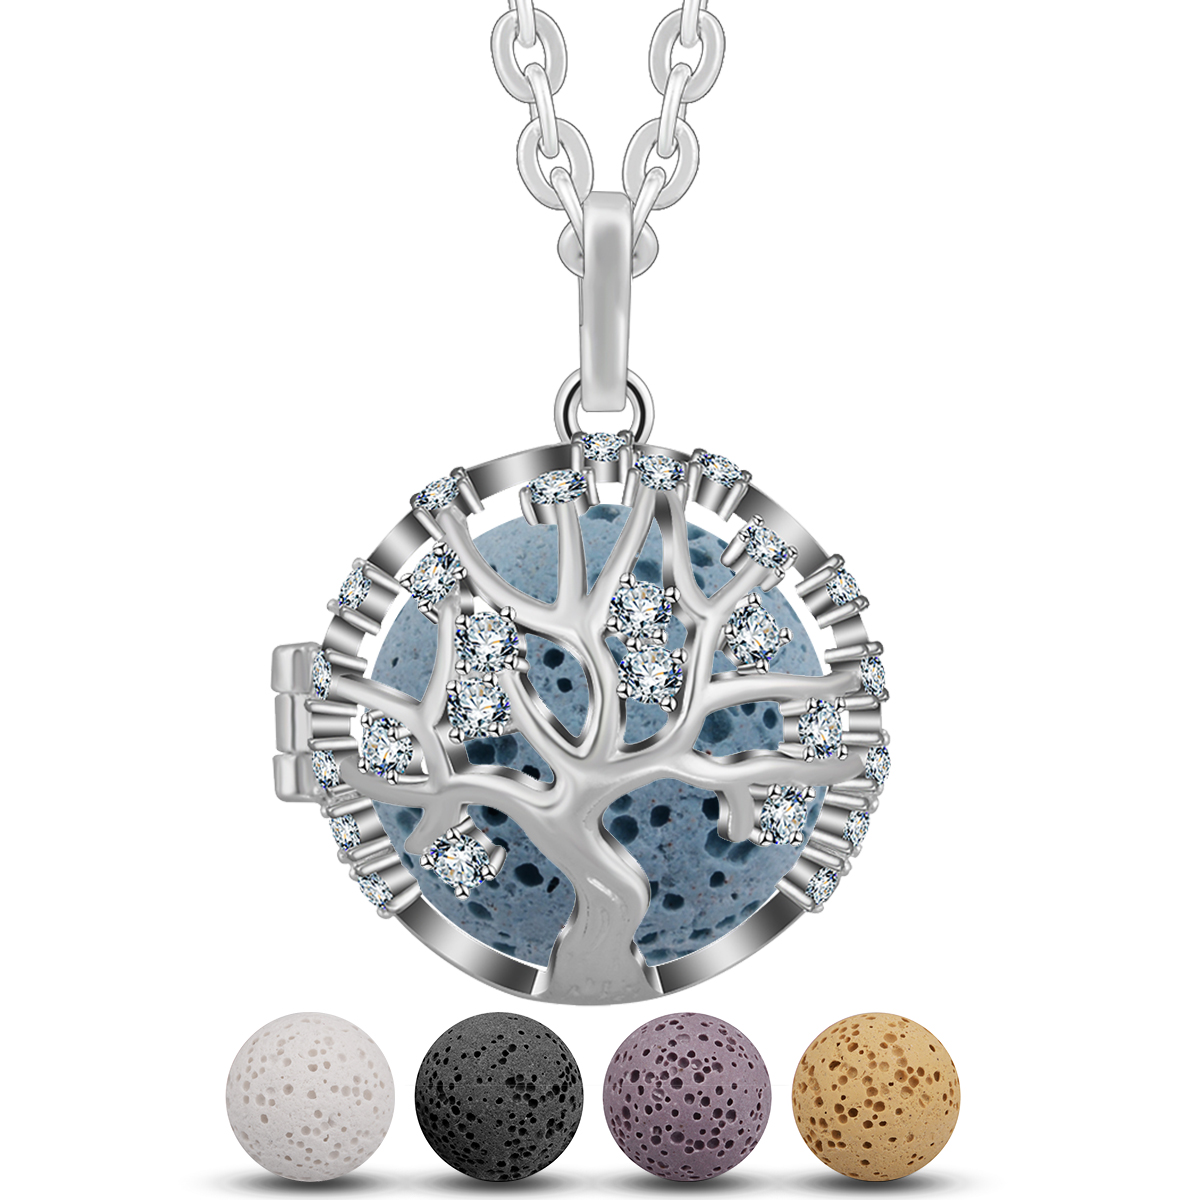 Merryshine Jewelry tree of life cage aromatherapy essential oil lava stone diffuser necklace